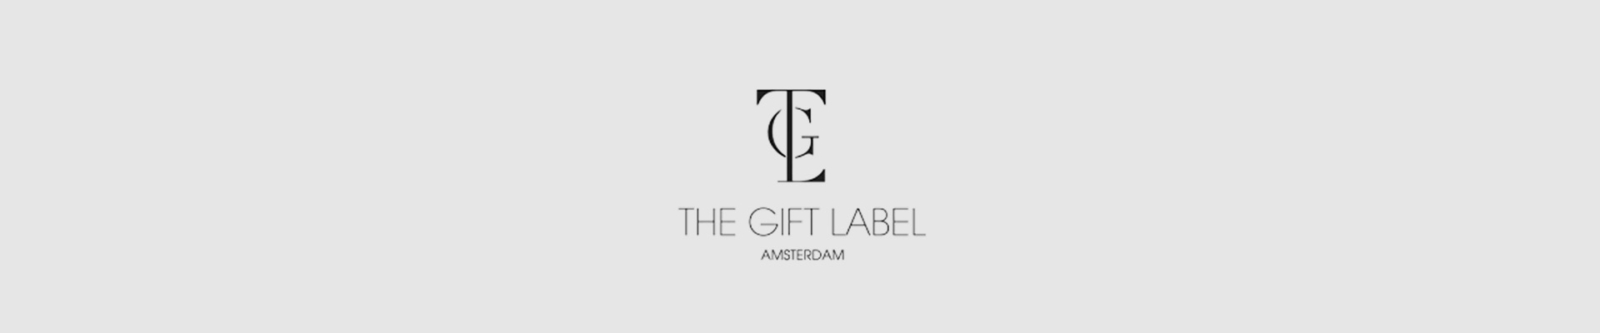 banner the gift label